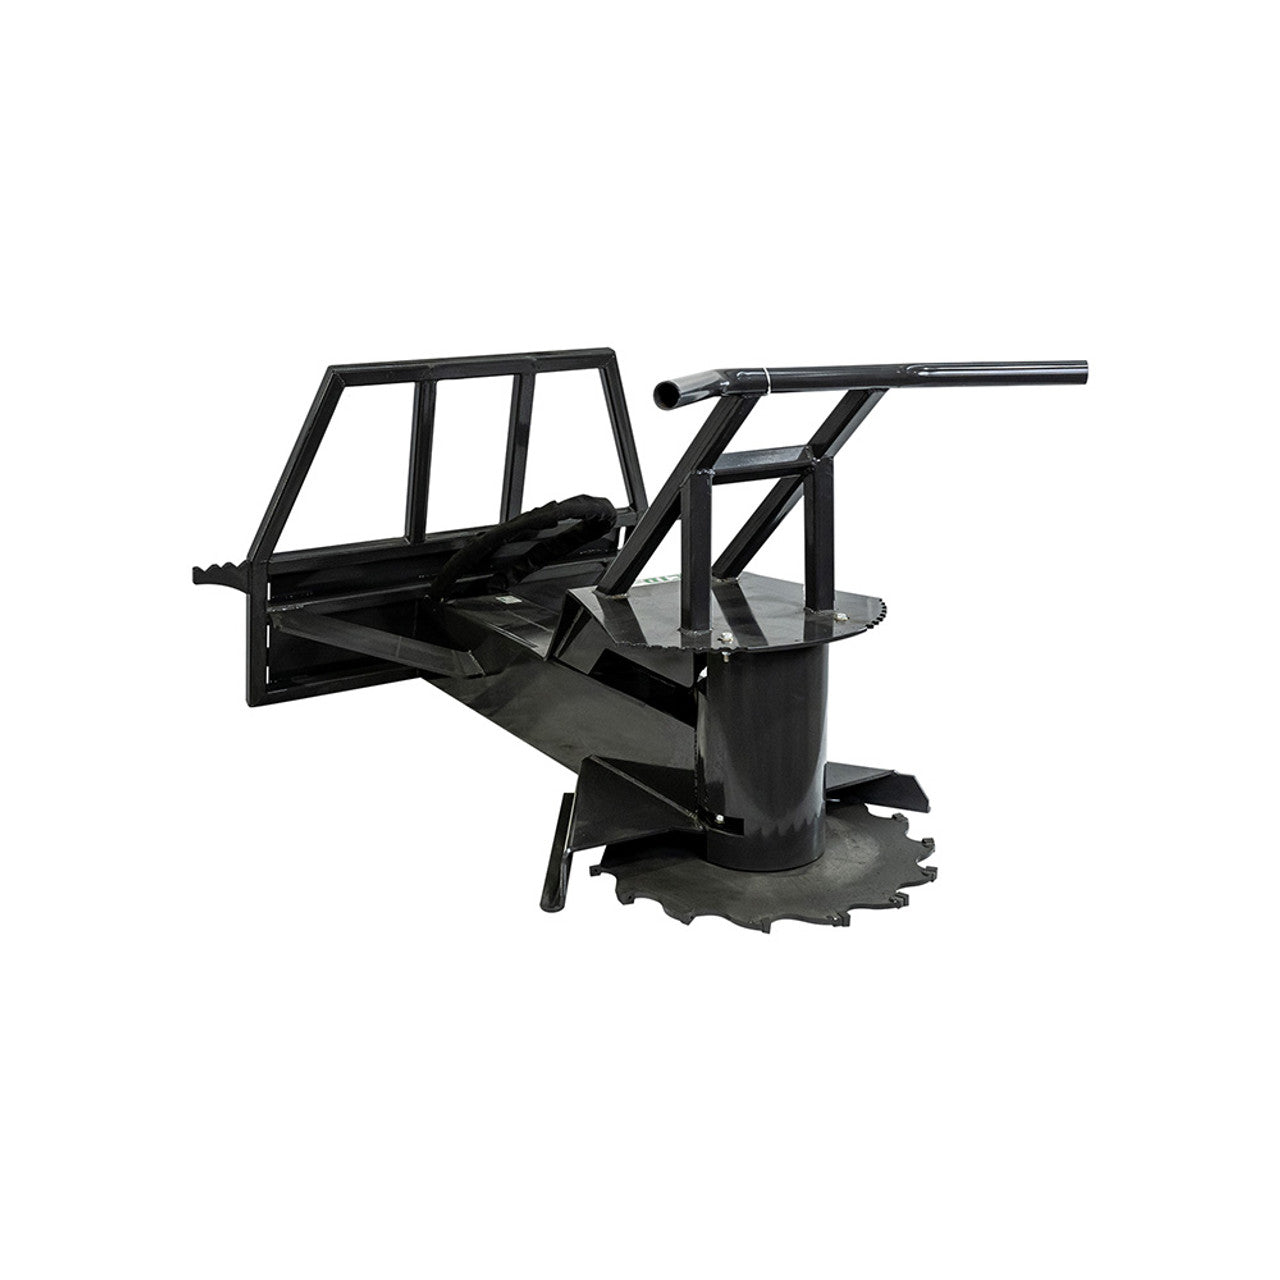 CID 82" WIDTH MANUAL ROTATING TREE SAW WITH BLADE HOLDER FOR SKID STEER